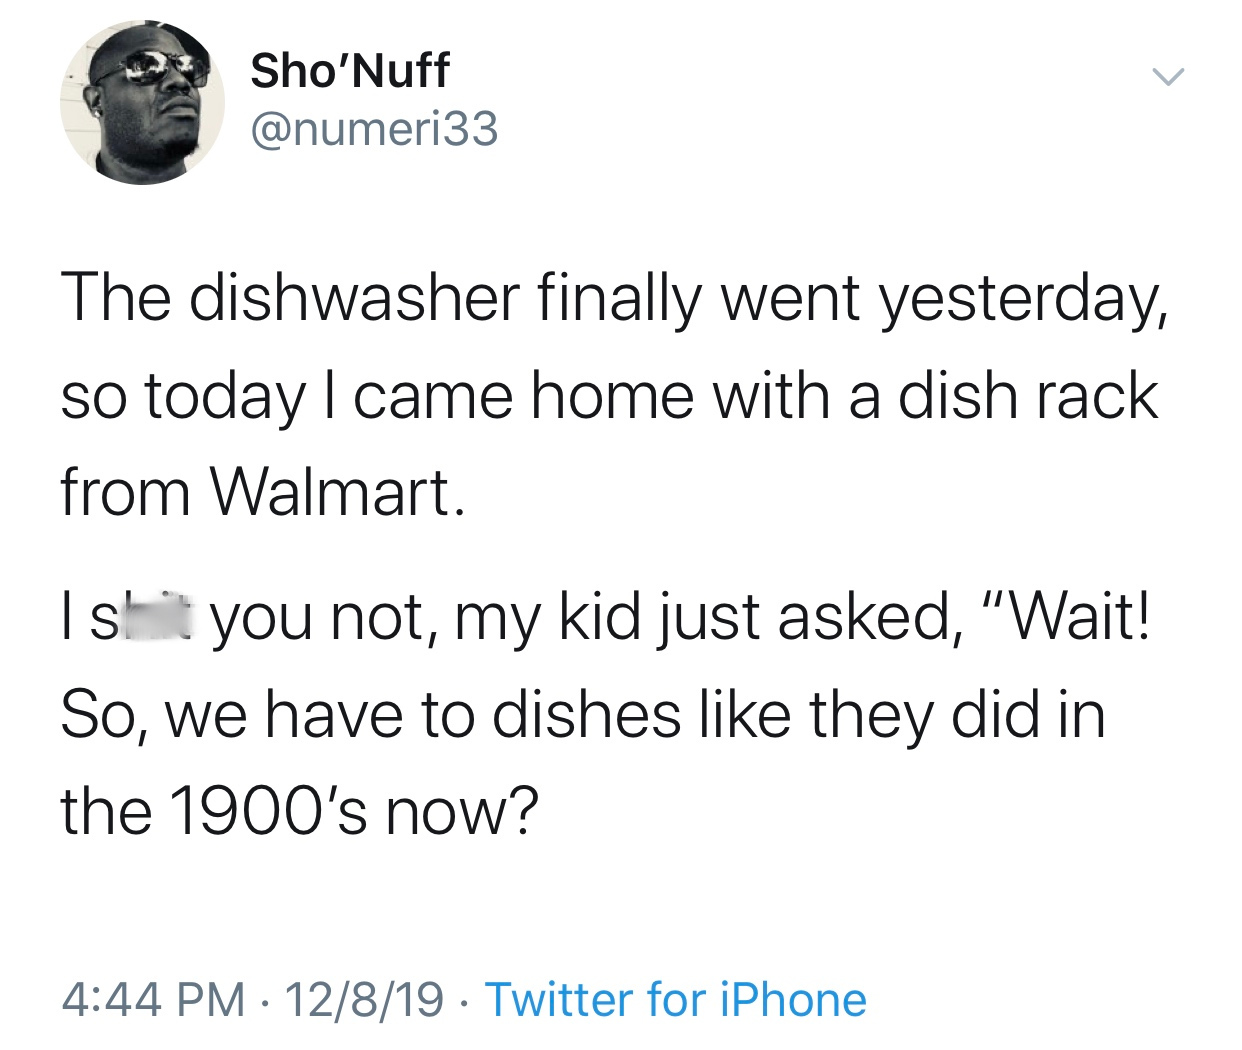 angle - Sho'Nuff The dishwasher finally went yesterday, so today I came home with a dish rack from Walmart. Ist you not, my kid just asked, "Wait! So, we have to dishes they did in the 1900's now? 12819 Twitter for iPhone